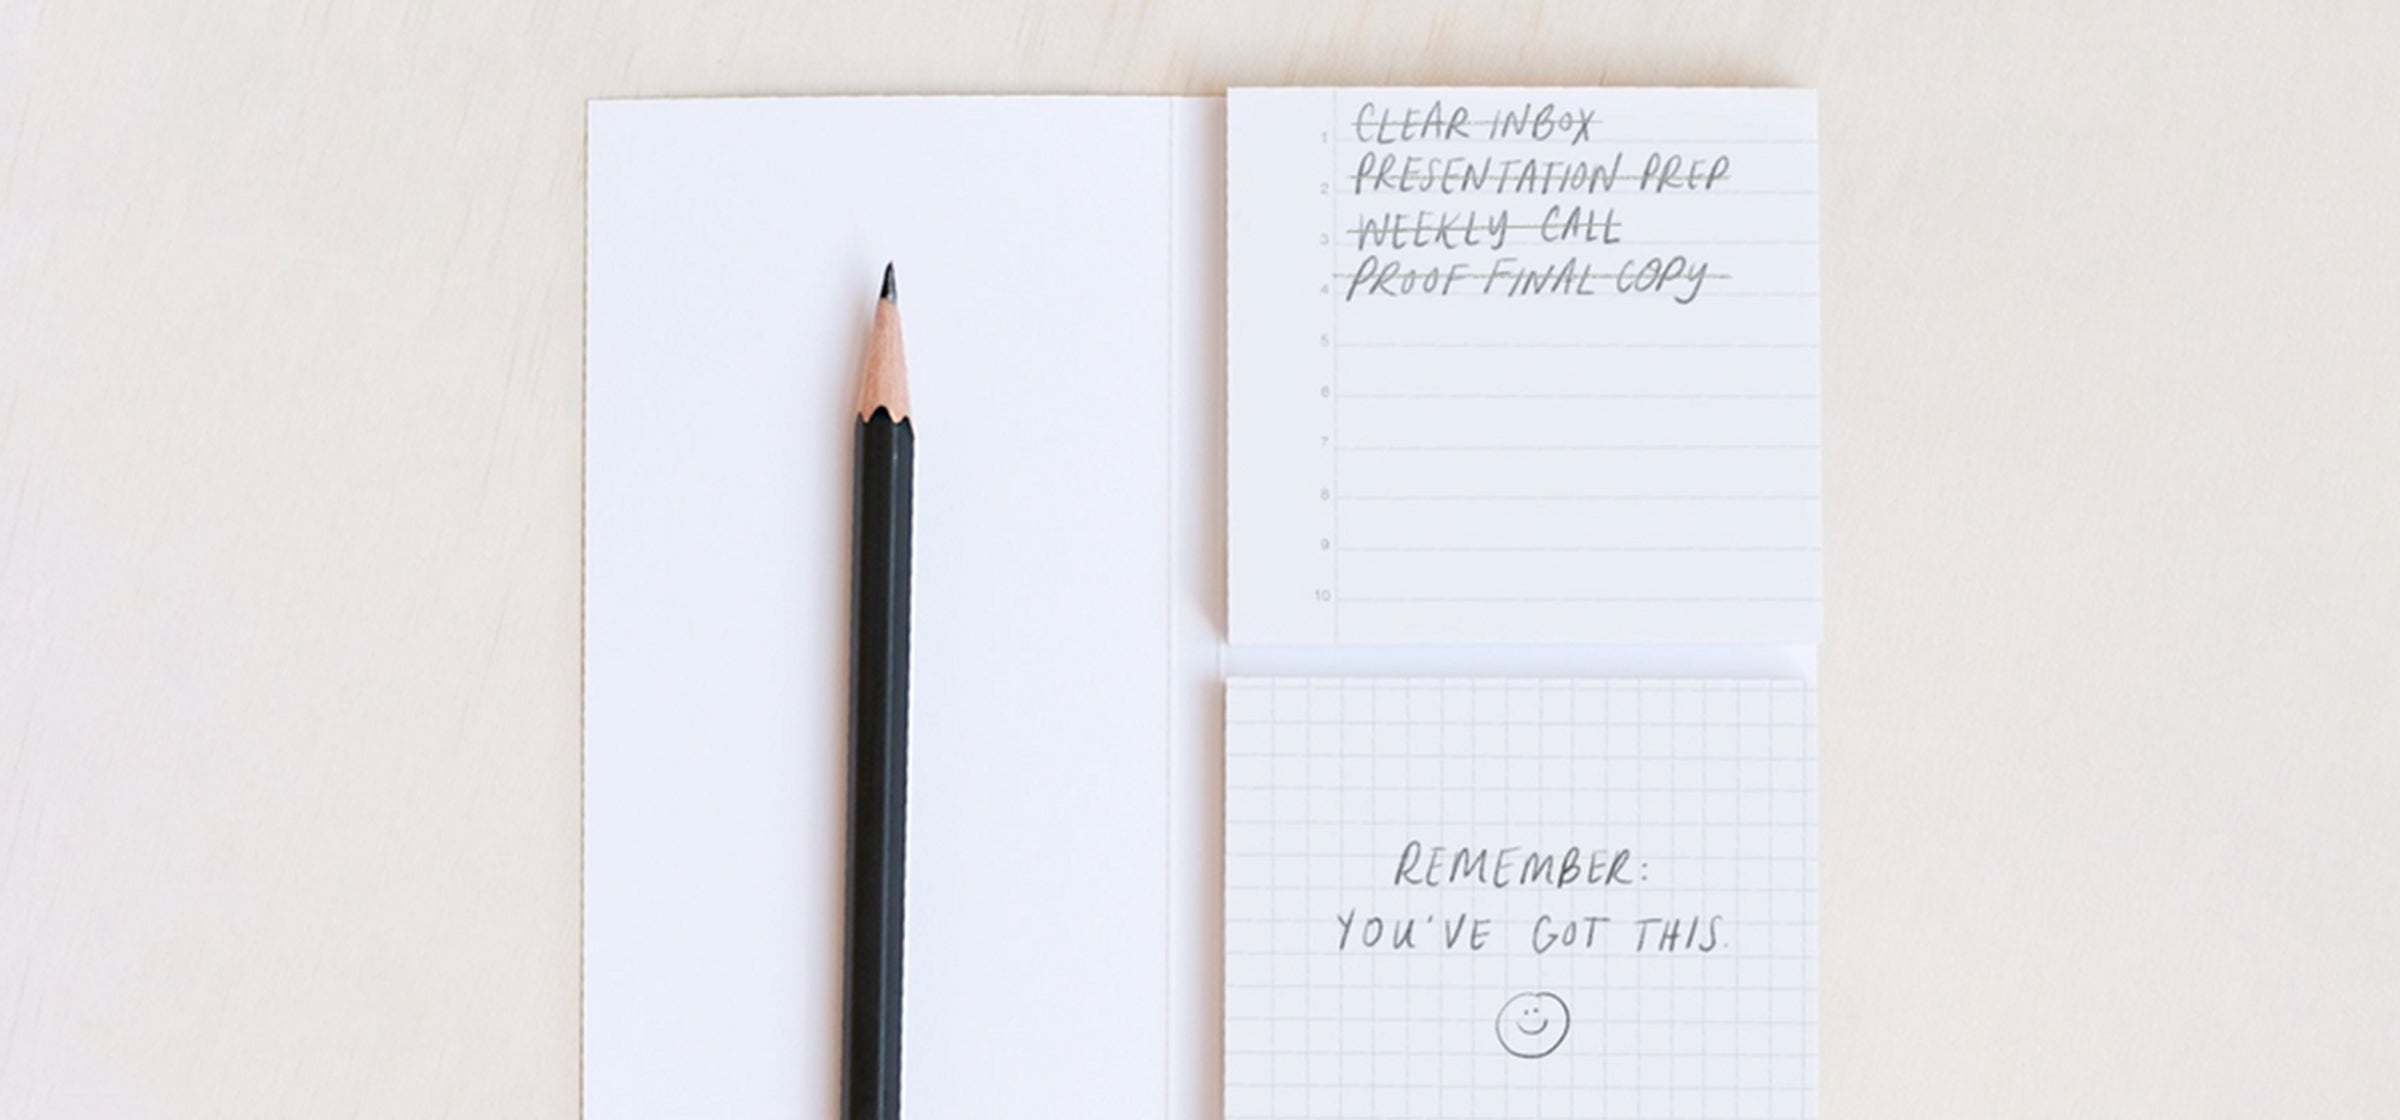 Adhesive pads and a classic no. 2 pencil sit on a cream-colored background. There is a to-do list and encouraging note written on the pages.